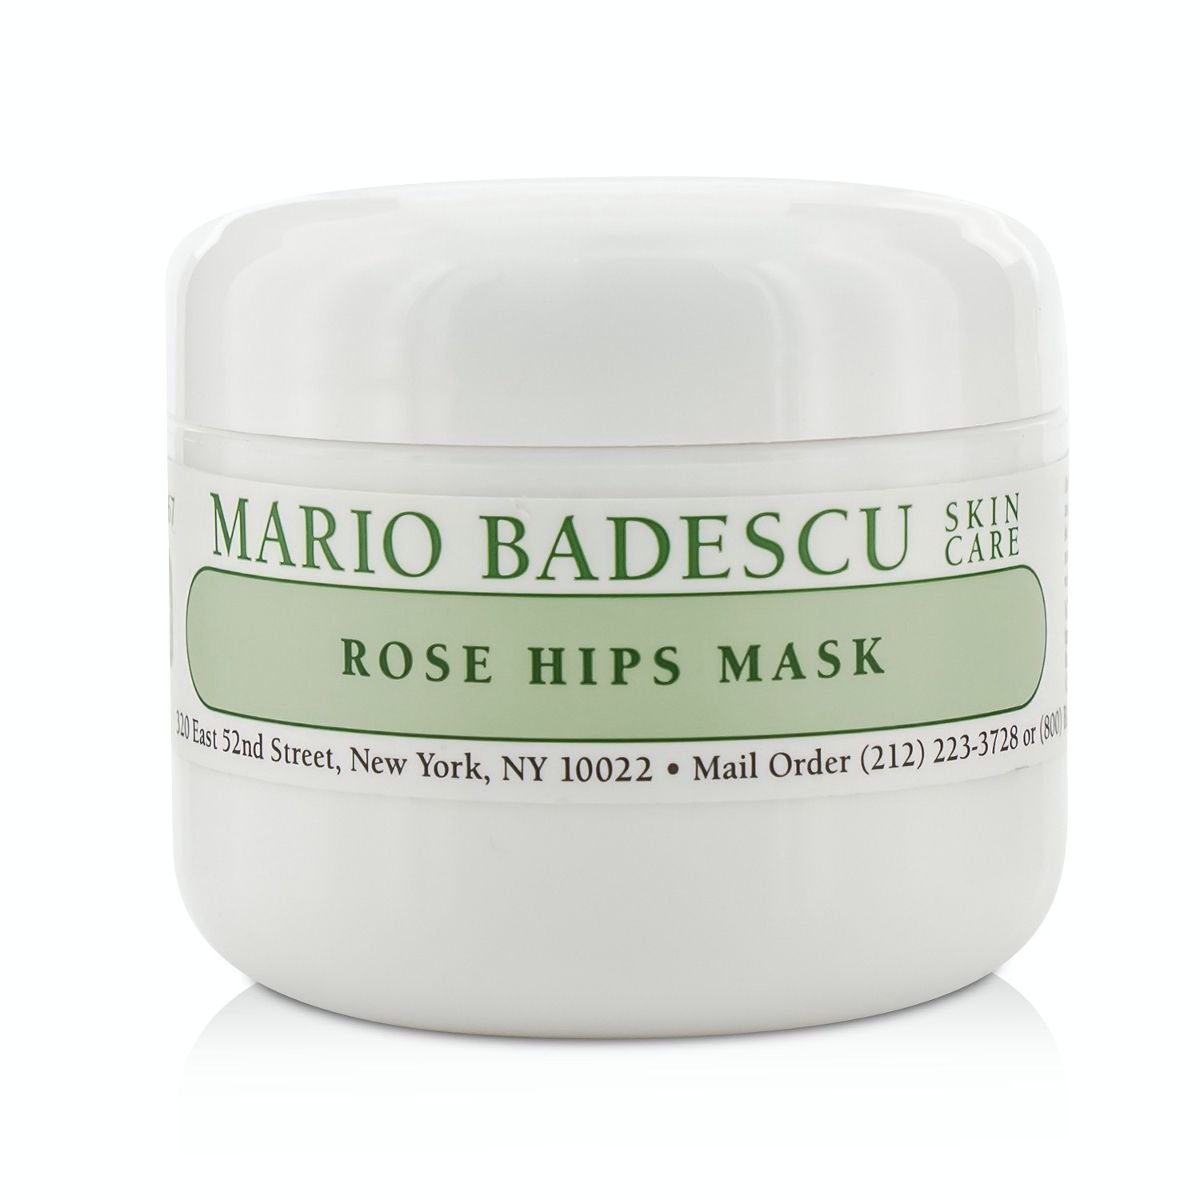 Rose Hips Mask - For Combination/ Dry/ Sensitive Skin Types Mario Badescu Image